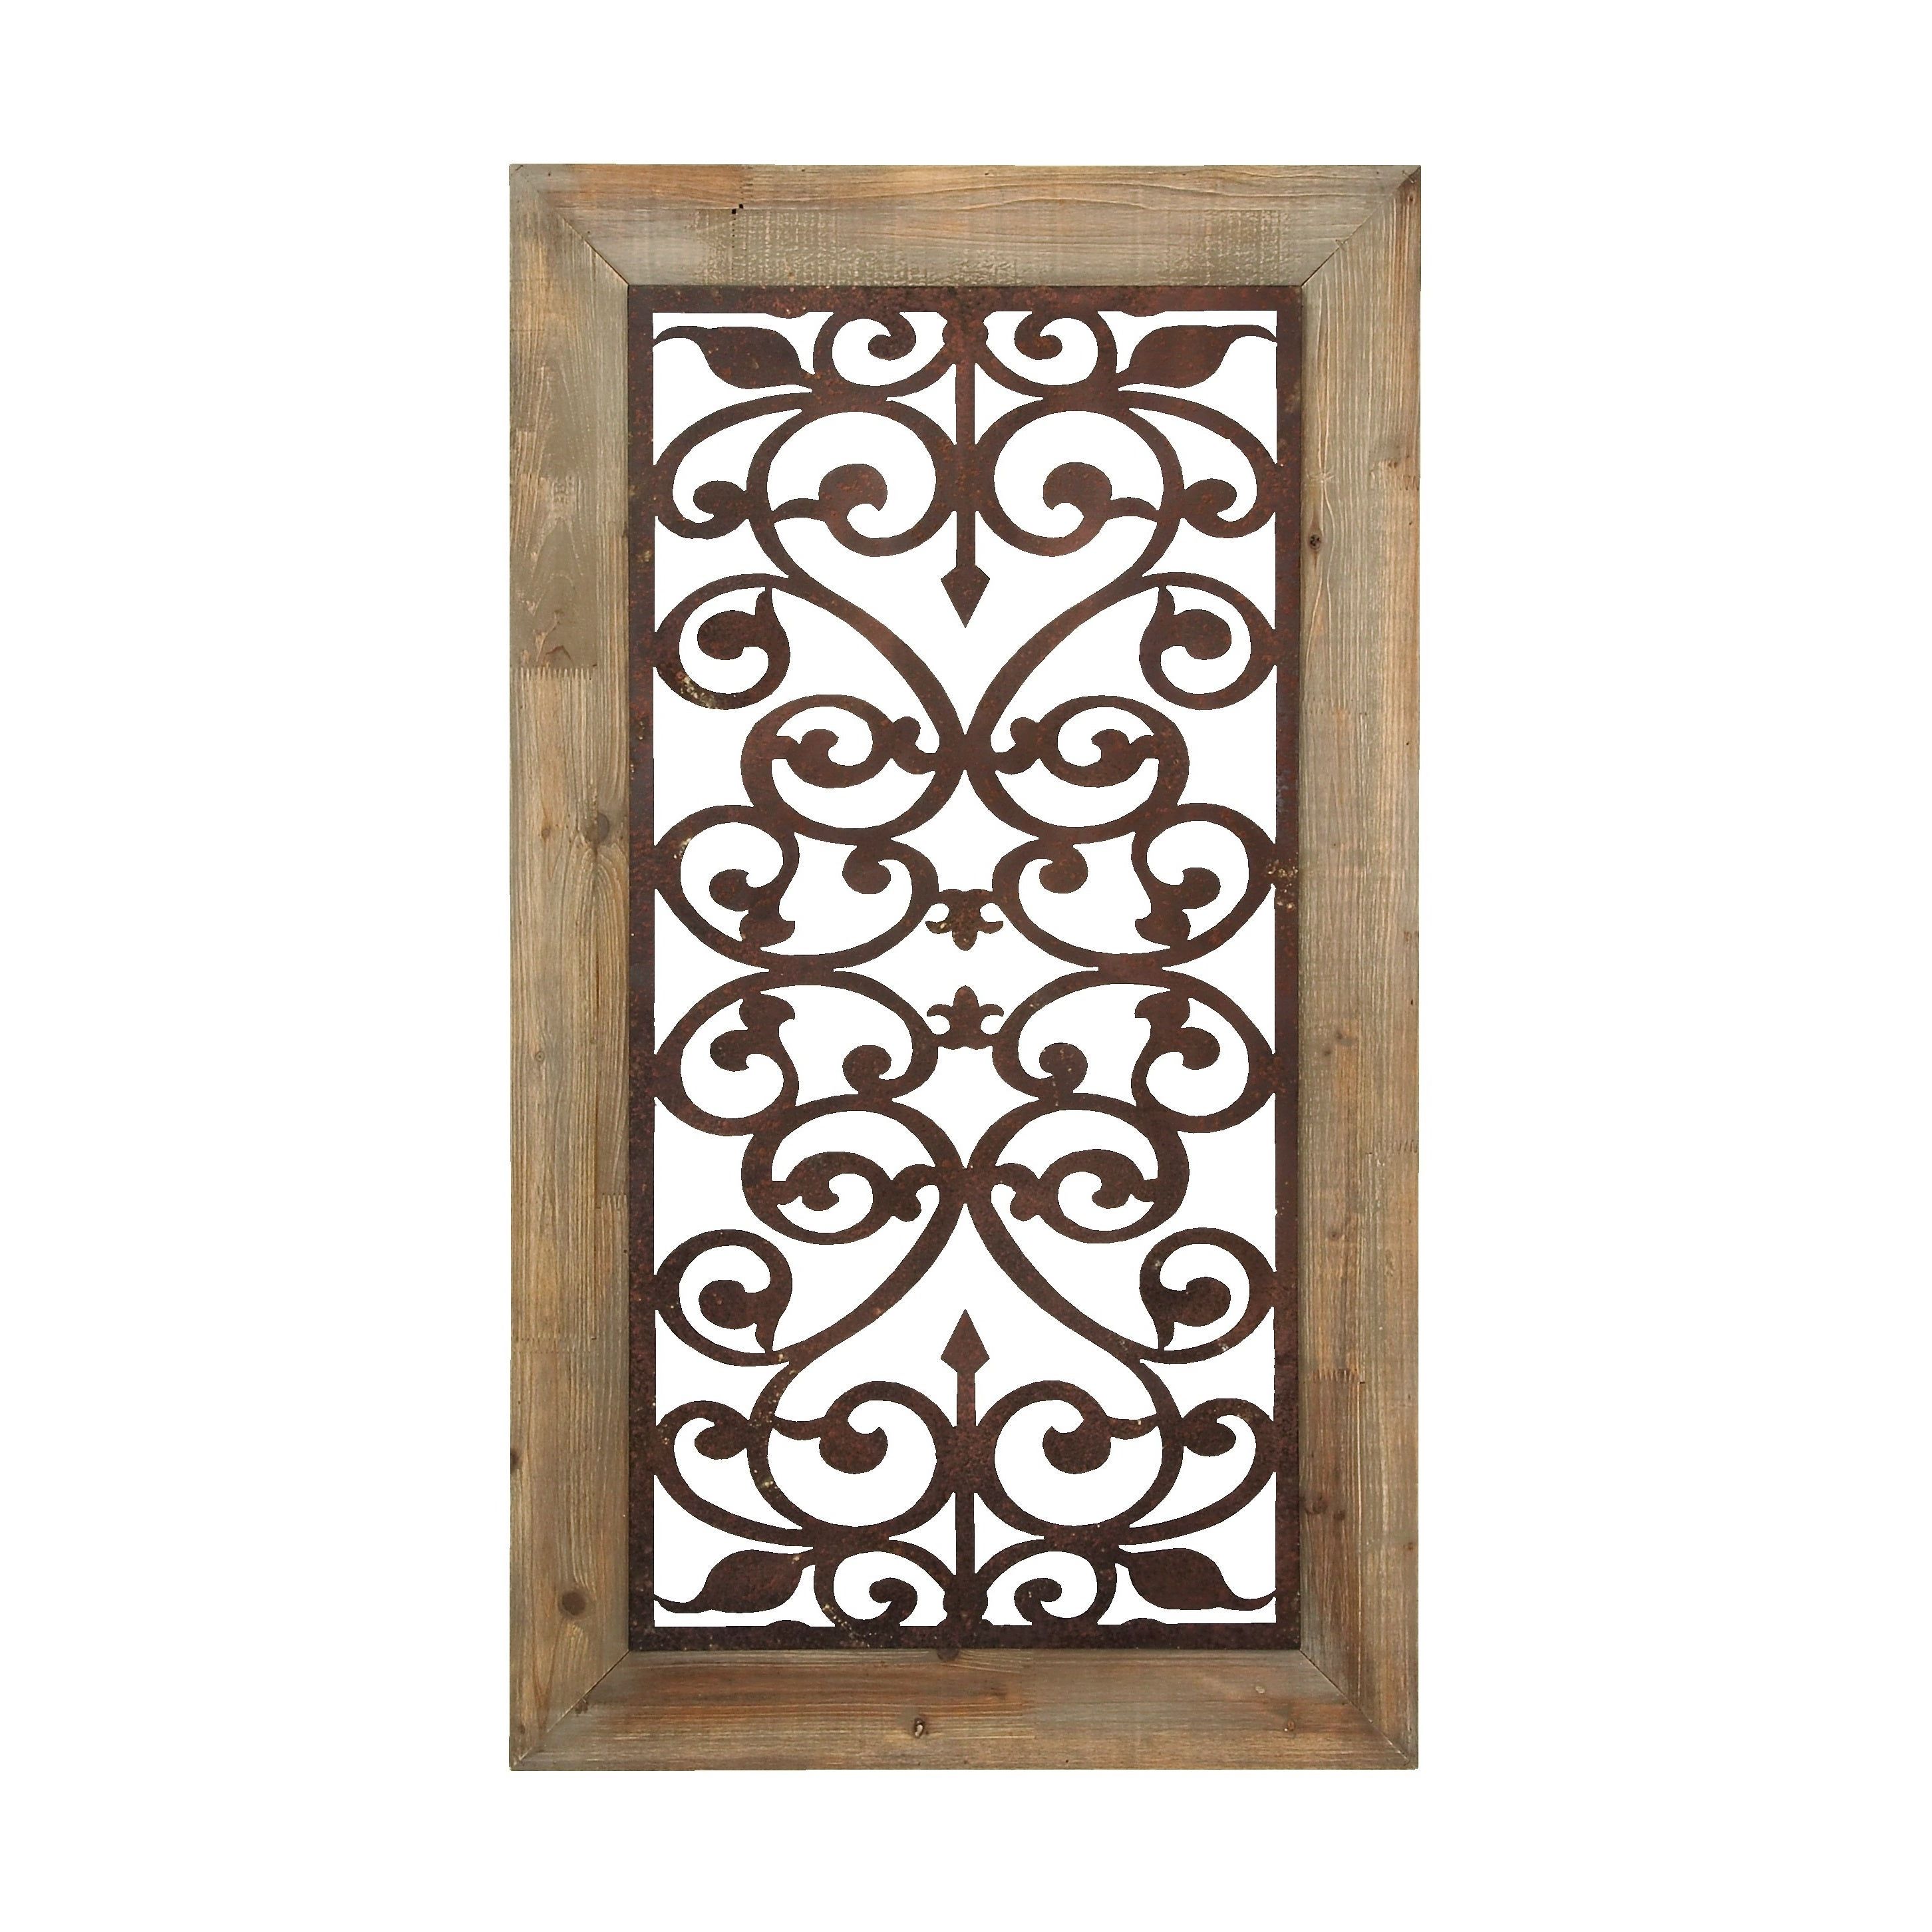 Rings Wall Decor By Wrought Studio Inside Most Current Shop 26" X 46" Distressed Wood & Brown Metal Wall Art Panel W (View 11 of 20)